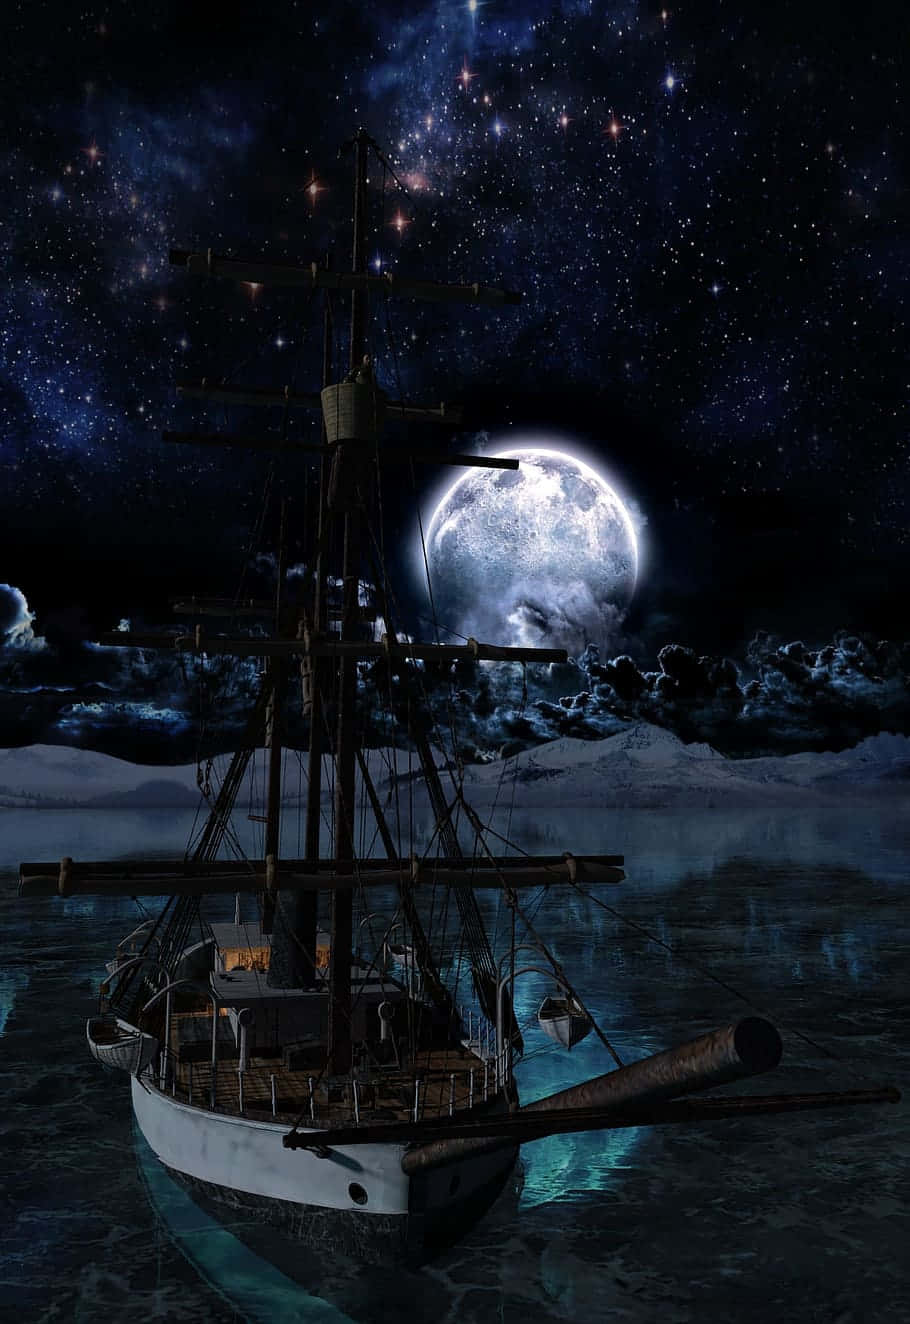 Beautiful Magical Night Sky With Boat Sailing With Giant Moon Wallpaper